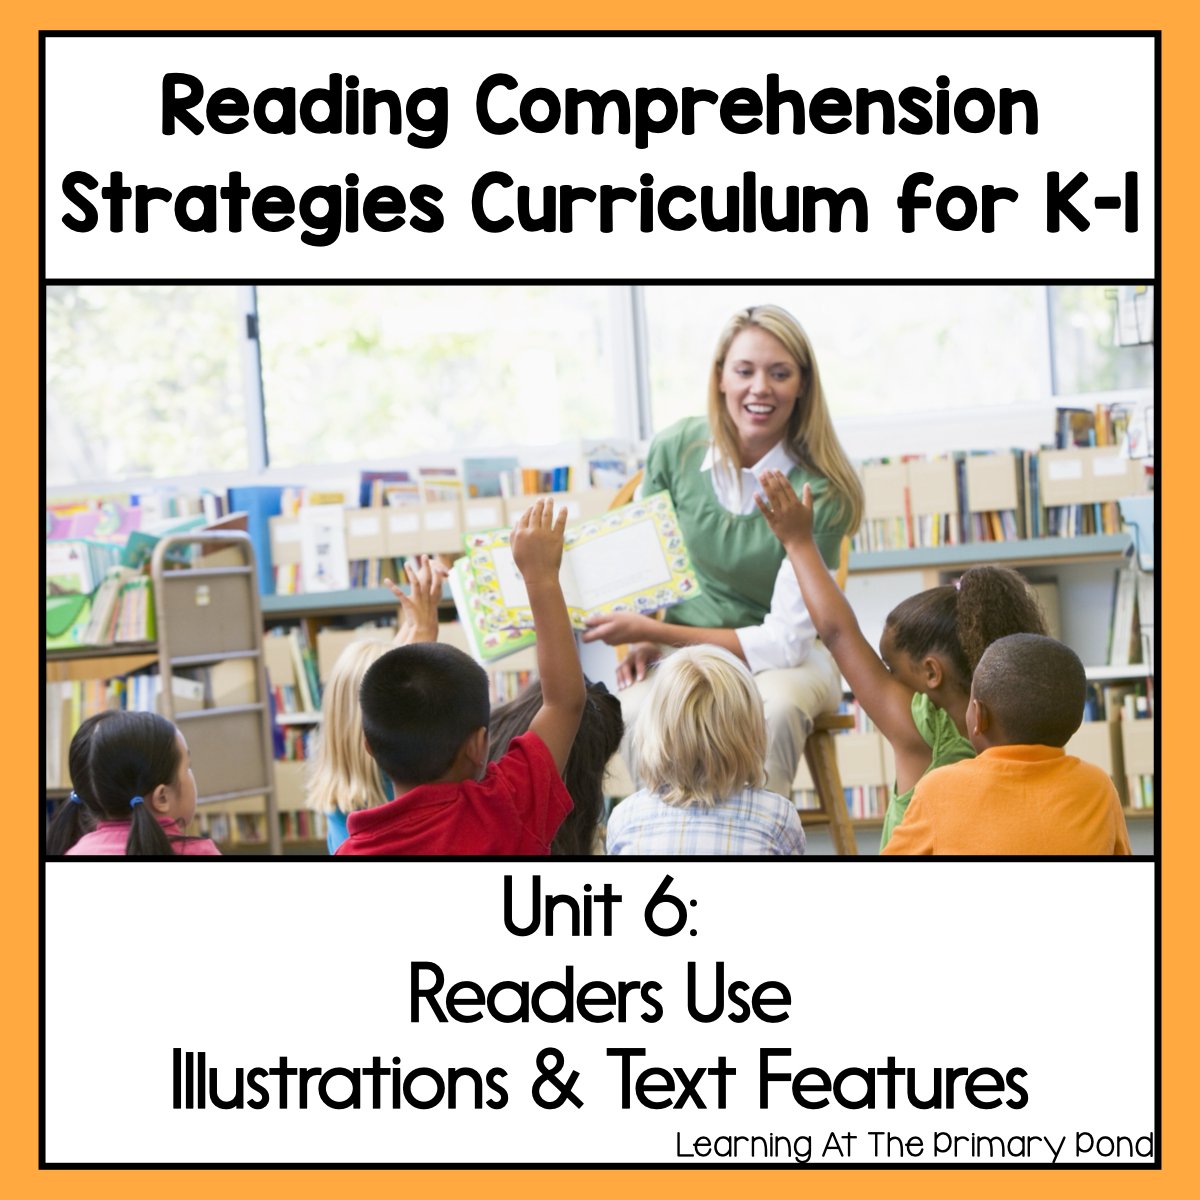 Reading Comprehension Lesson Plans for K-1 {Unit 6: Text Features & Illustrations} - learning-at-the-primary-pond